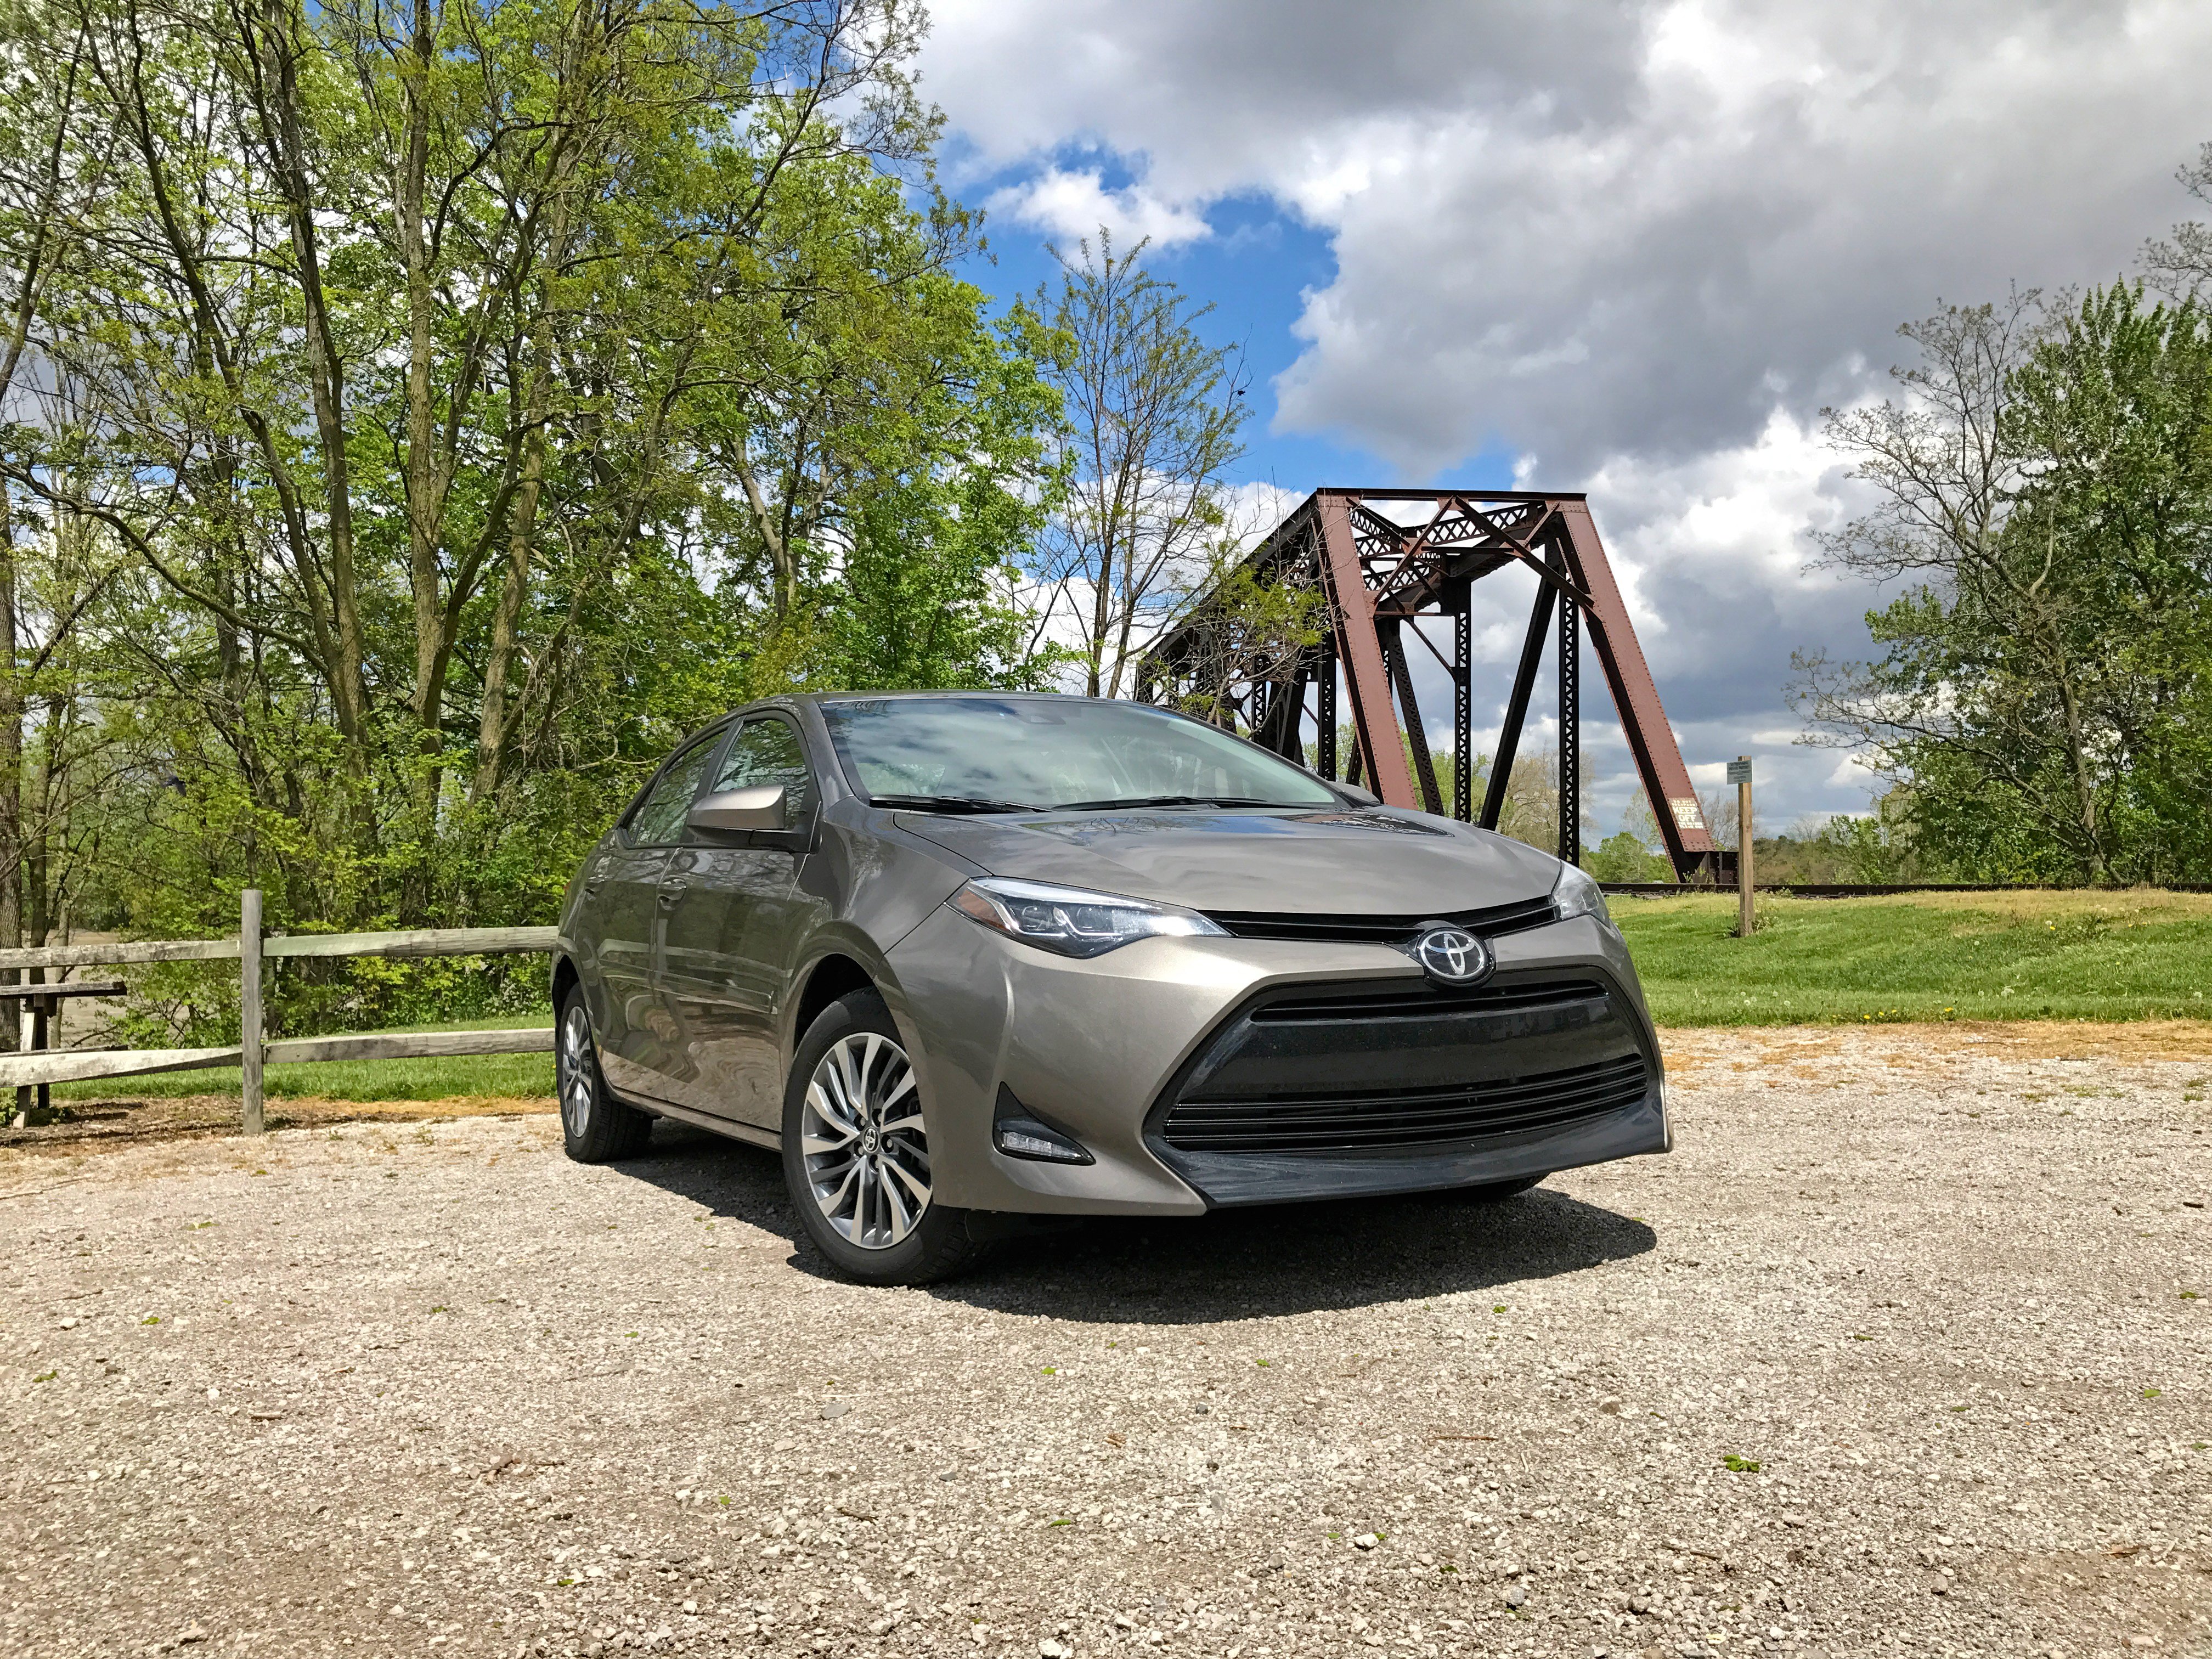 The 2017 Toyota Corolla is delivers amazing value for the price.